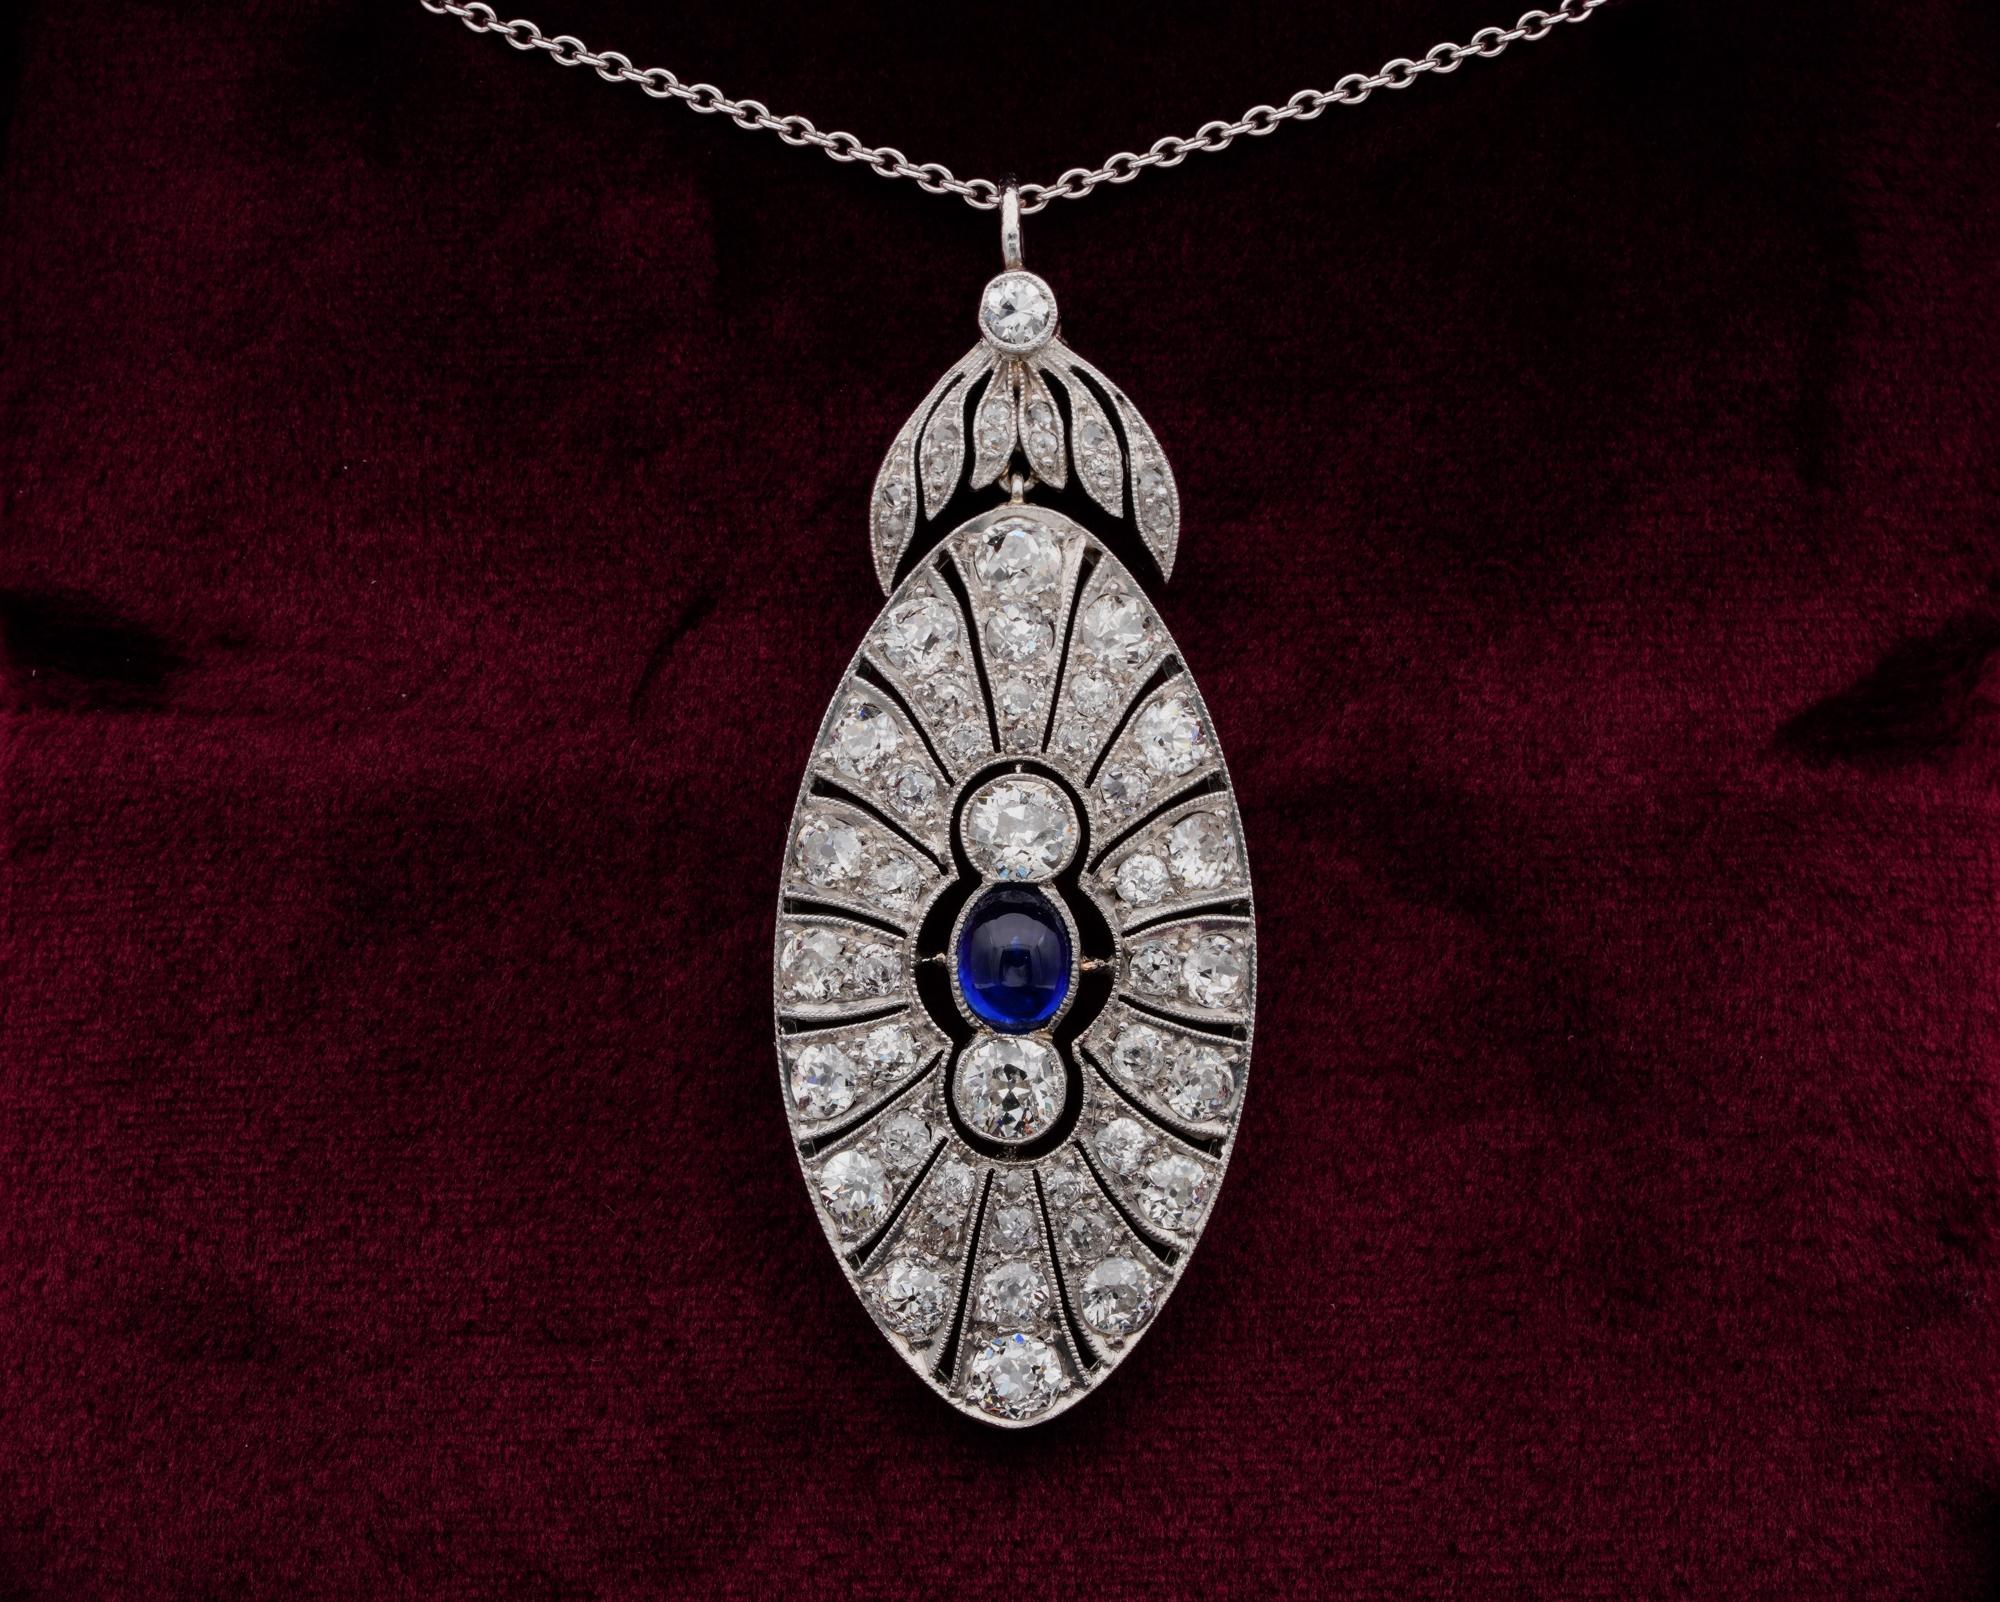 The Belle Epoque
This magnificent art work of the Belle Epoque Period is French origin Platinum crafted – it dates 1900 ca
Magnificent open work is rendered in a rich set of the finest Diamonds and Natural sapphire at the centre point giving a